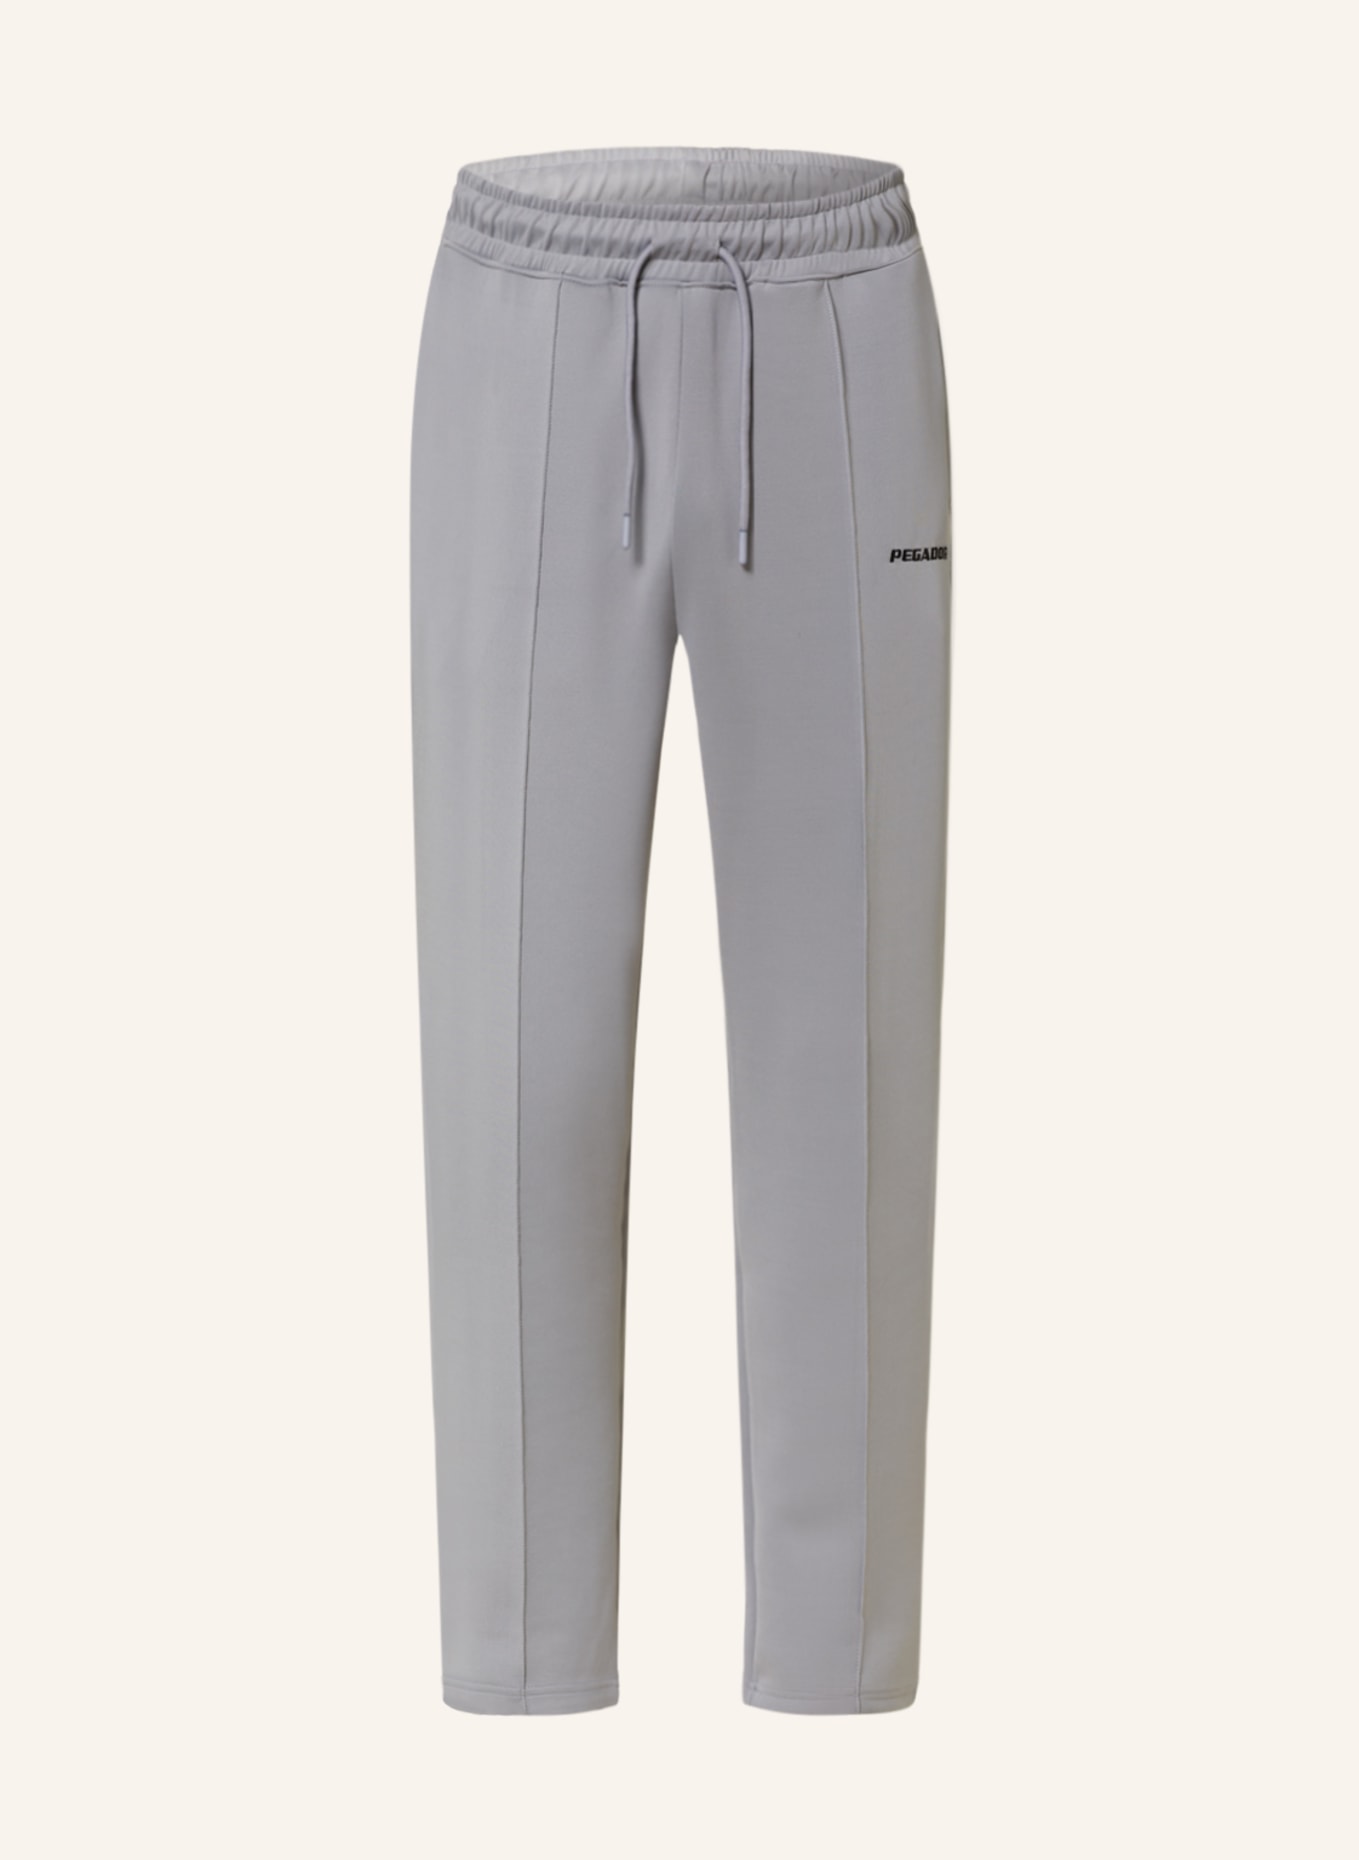 PEGADOR Pants in jogger style, Color: GRAY (Image 1)